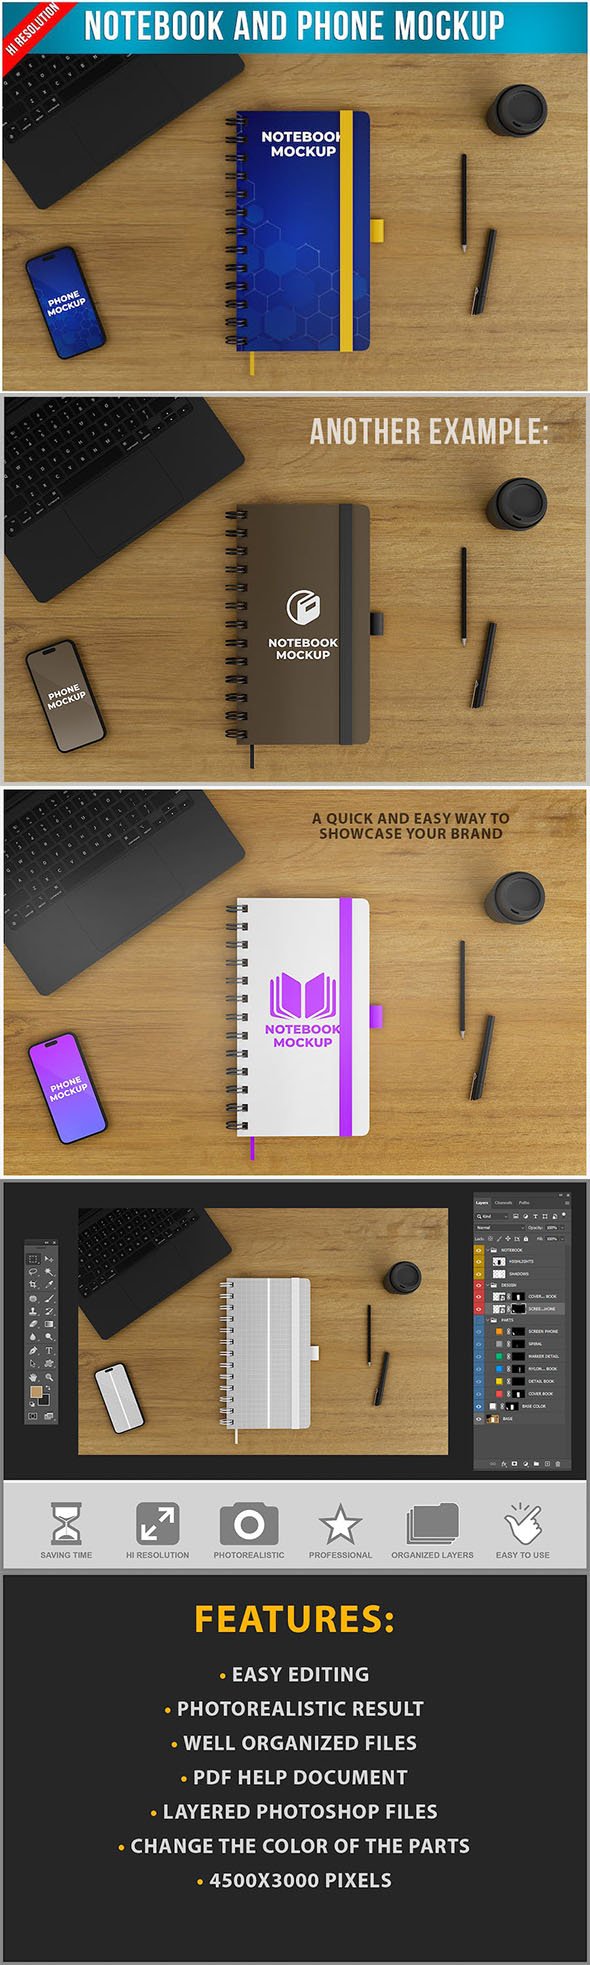 Notebook and Phone on Top of a Wooden Table Mockup - HYHMG8B